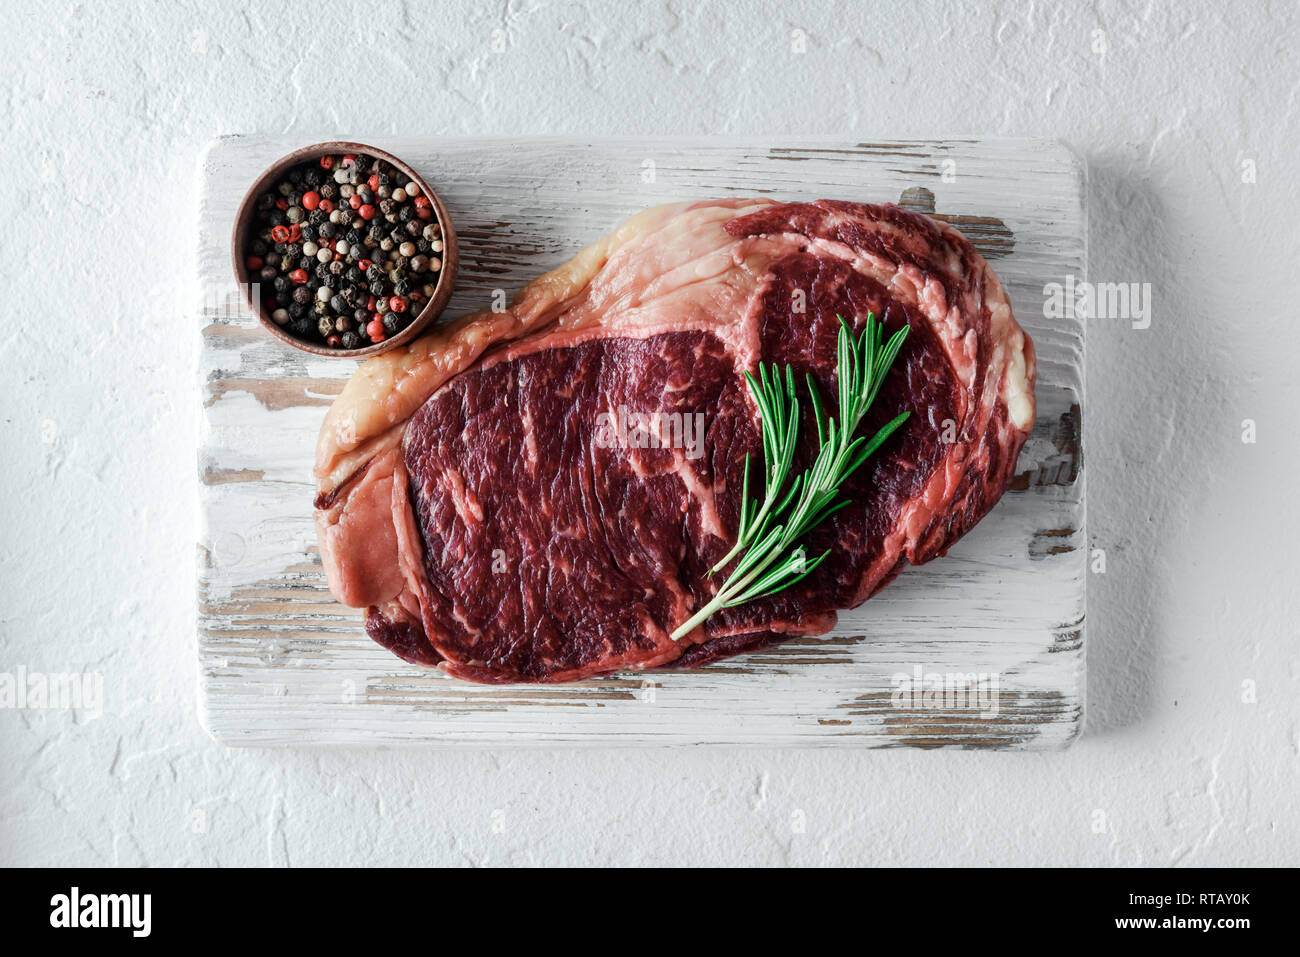 Marbling ribeye steak with pepper and rosemary on white wood plate. Prime rib beef chop Stock Photo